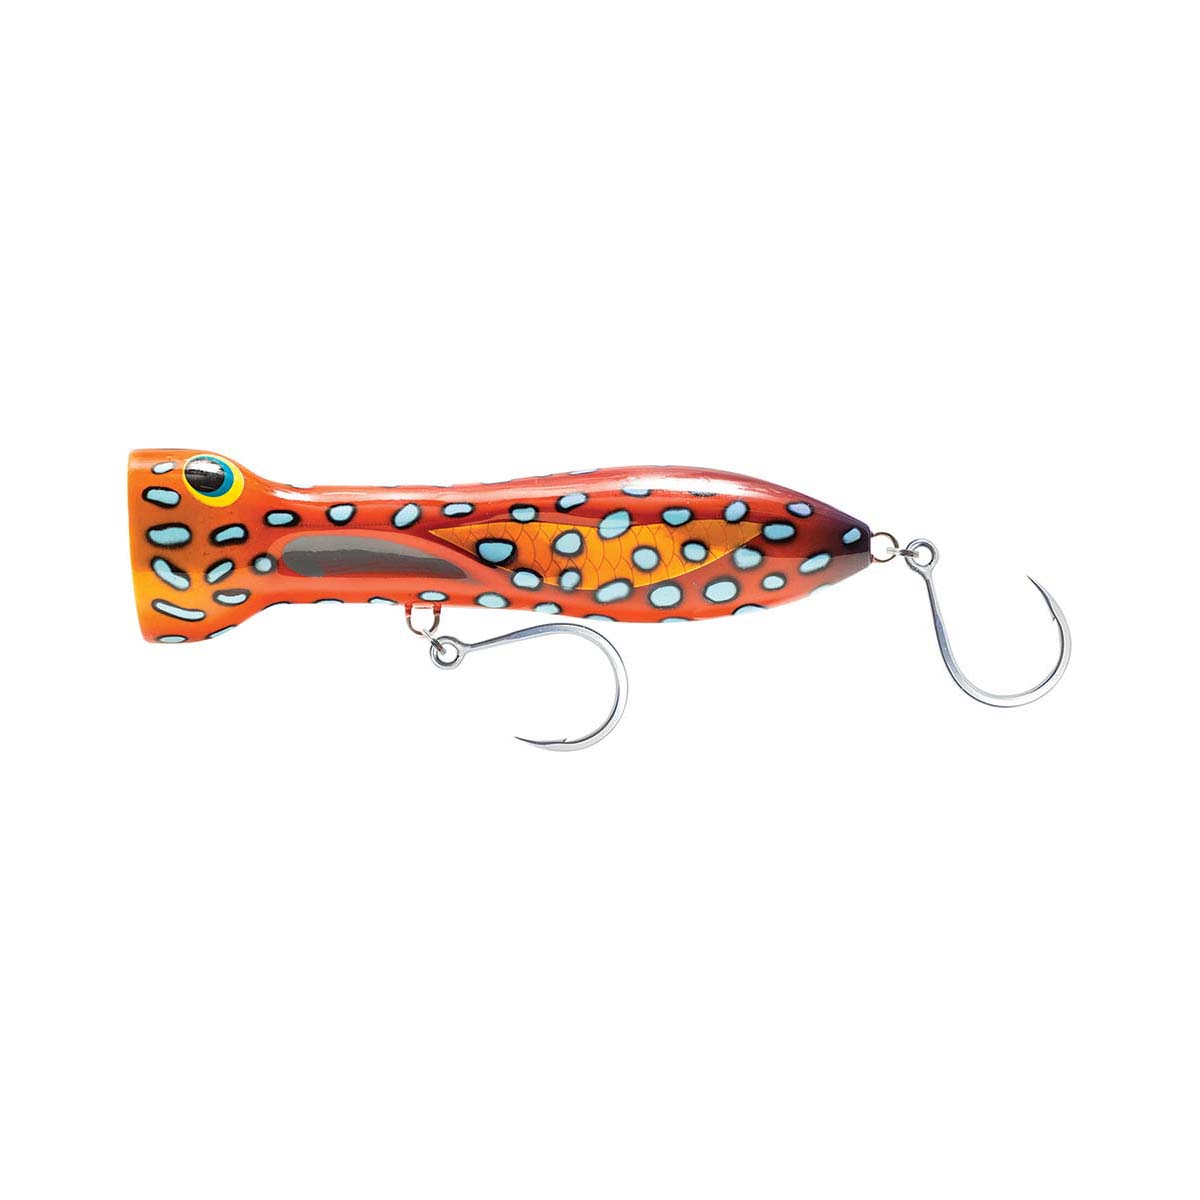 Nomad Chug Norris Surface Popper Lure 18cm Coral Trout